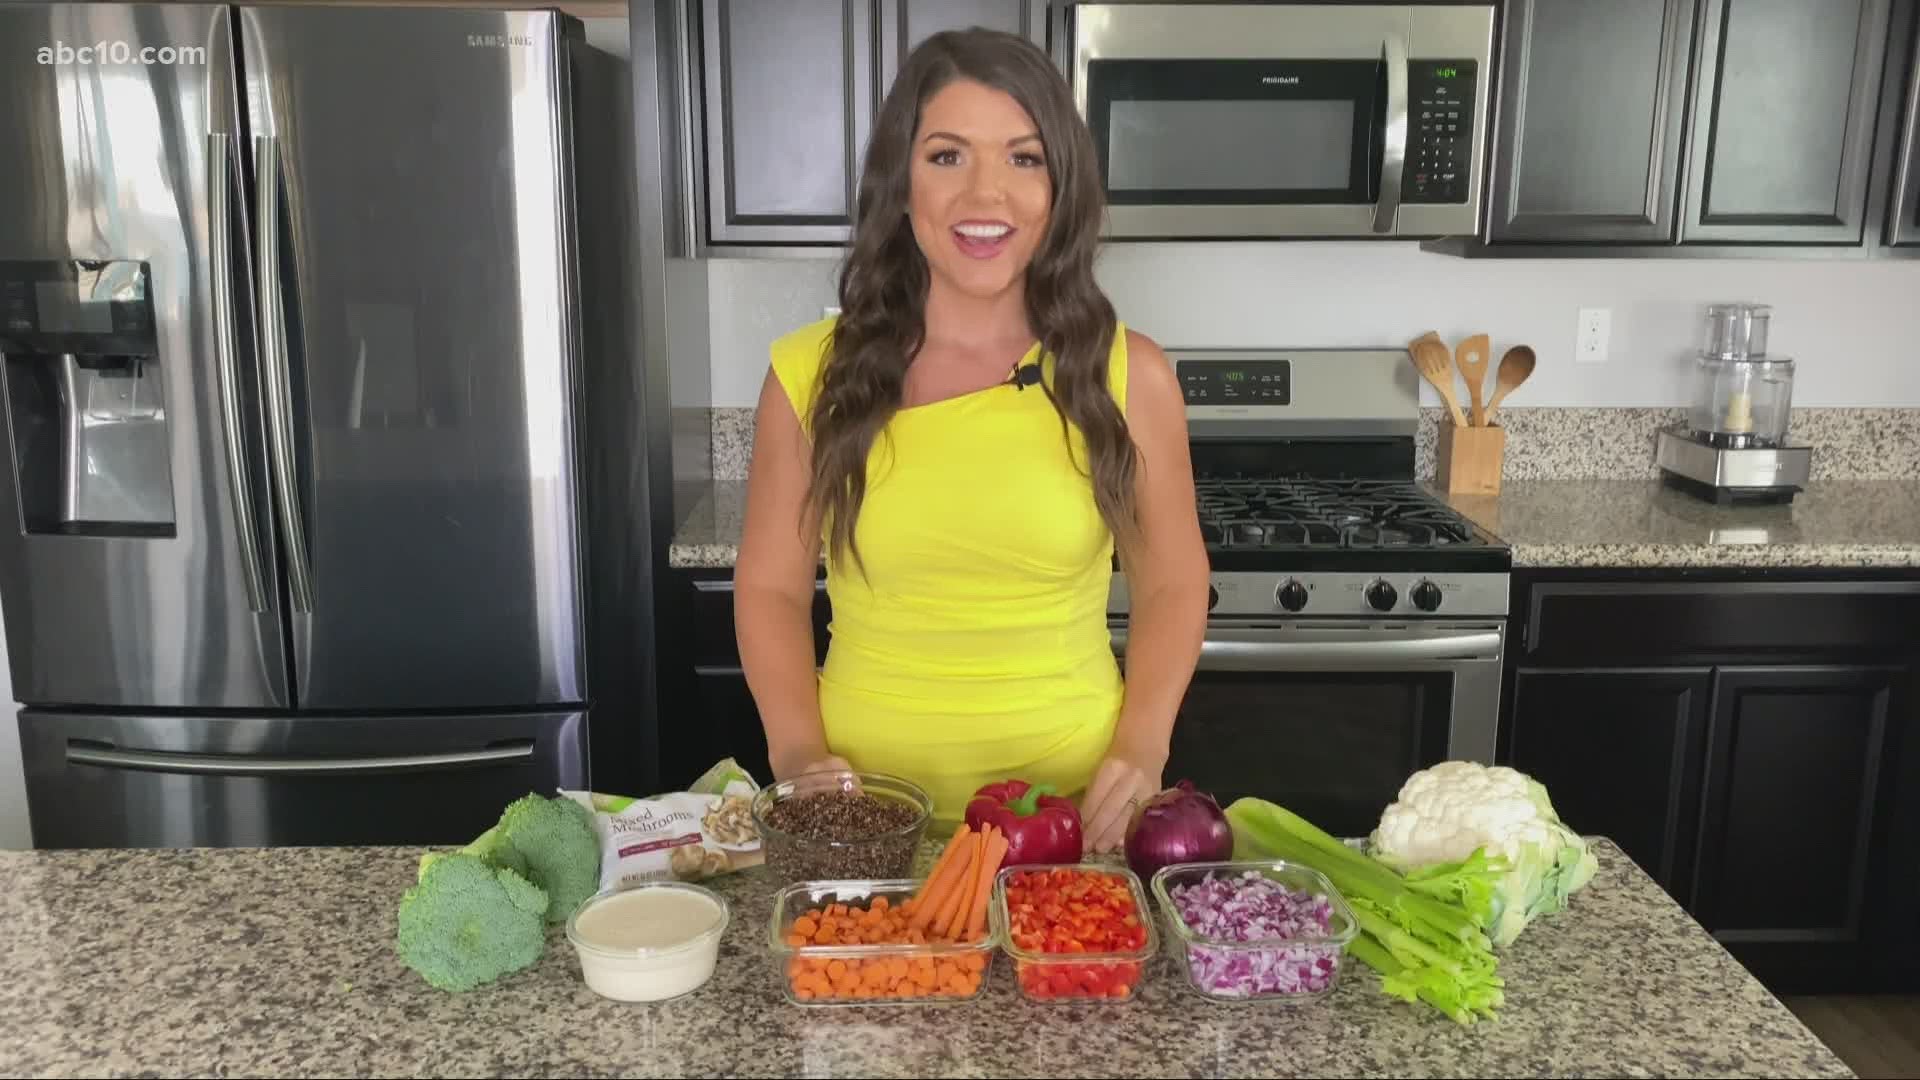 Megan Evans shares some meal prep tips to save some time for the family.